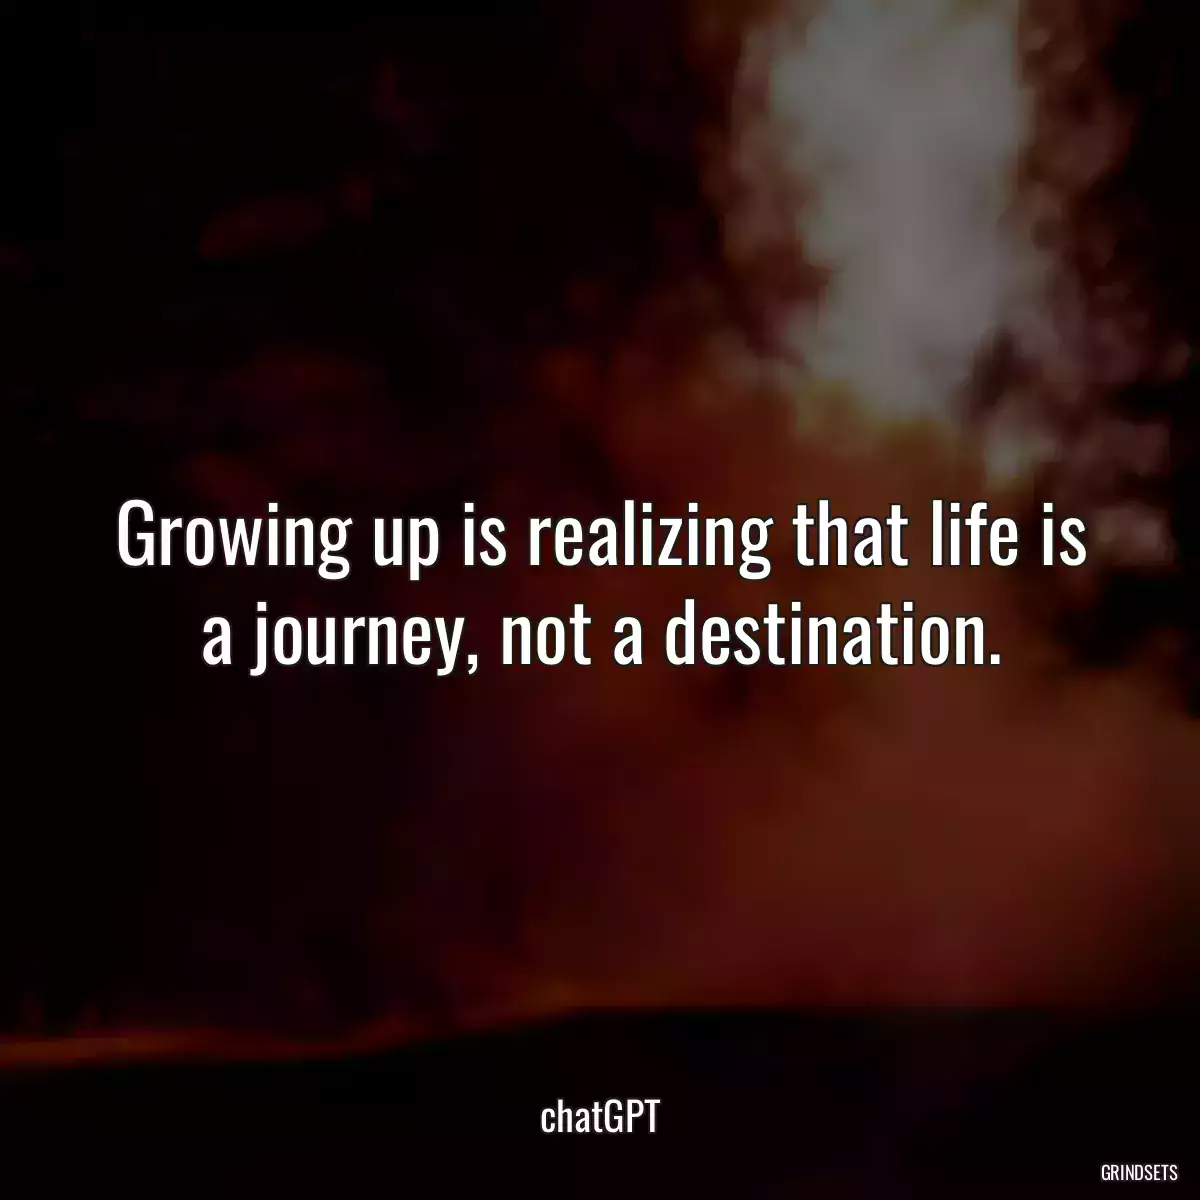 Growing up is realizing that life is a journey, not a destination.